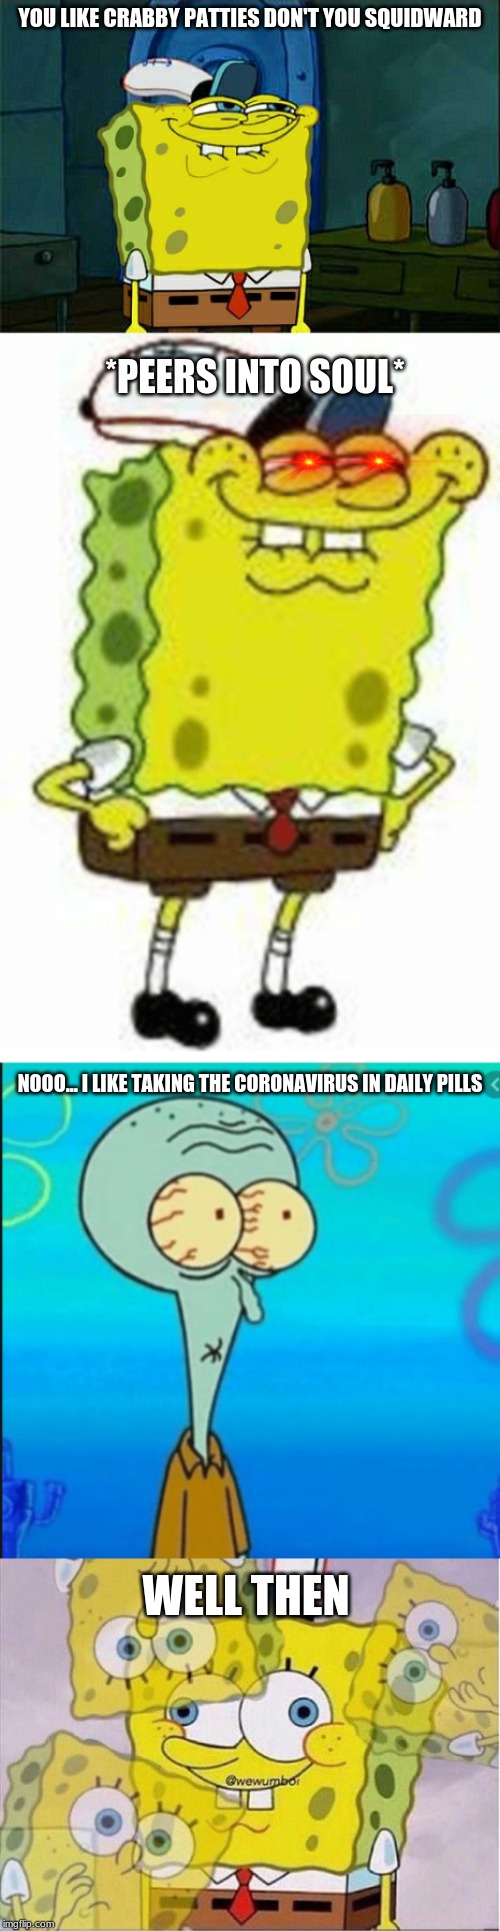 read it, it's funny | YOU LIKE CRABBY PATTIES DON'T YOU SQUIDWARD; *PEERS INTO SOUL*; NOOO... I LIKE TAKING THE CORONAVIRUS IN DAILY PILLS; WELL THEN | image tagged in memes,dont you squidward,lol,funny,funny meme | made w/ Imgflip meme maker